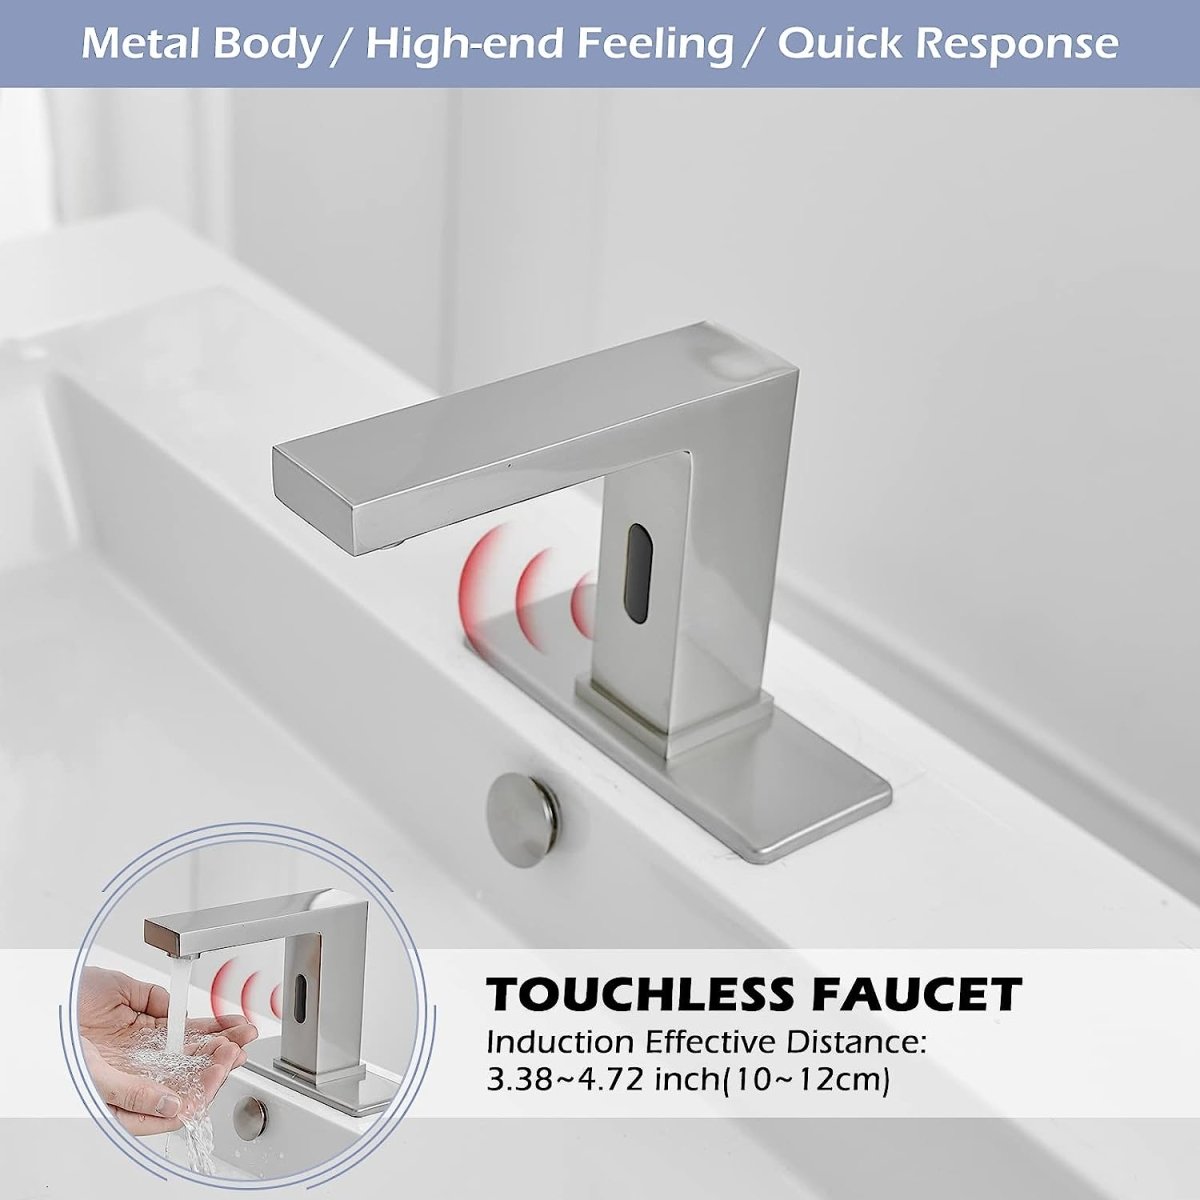 Automatic Sensor Touchless Bathroom Faucet Brushed Nickel - buyfaucet.com